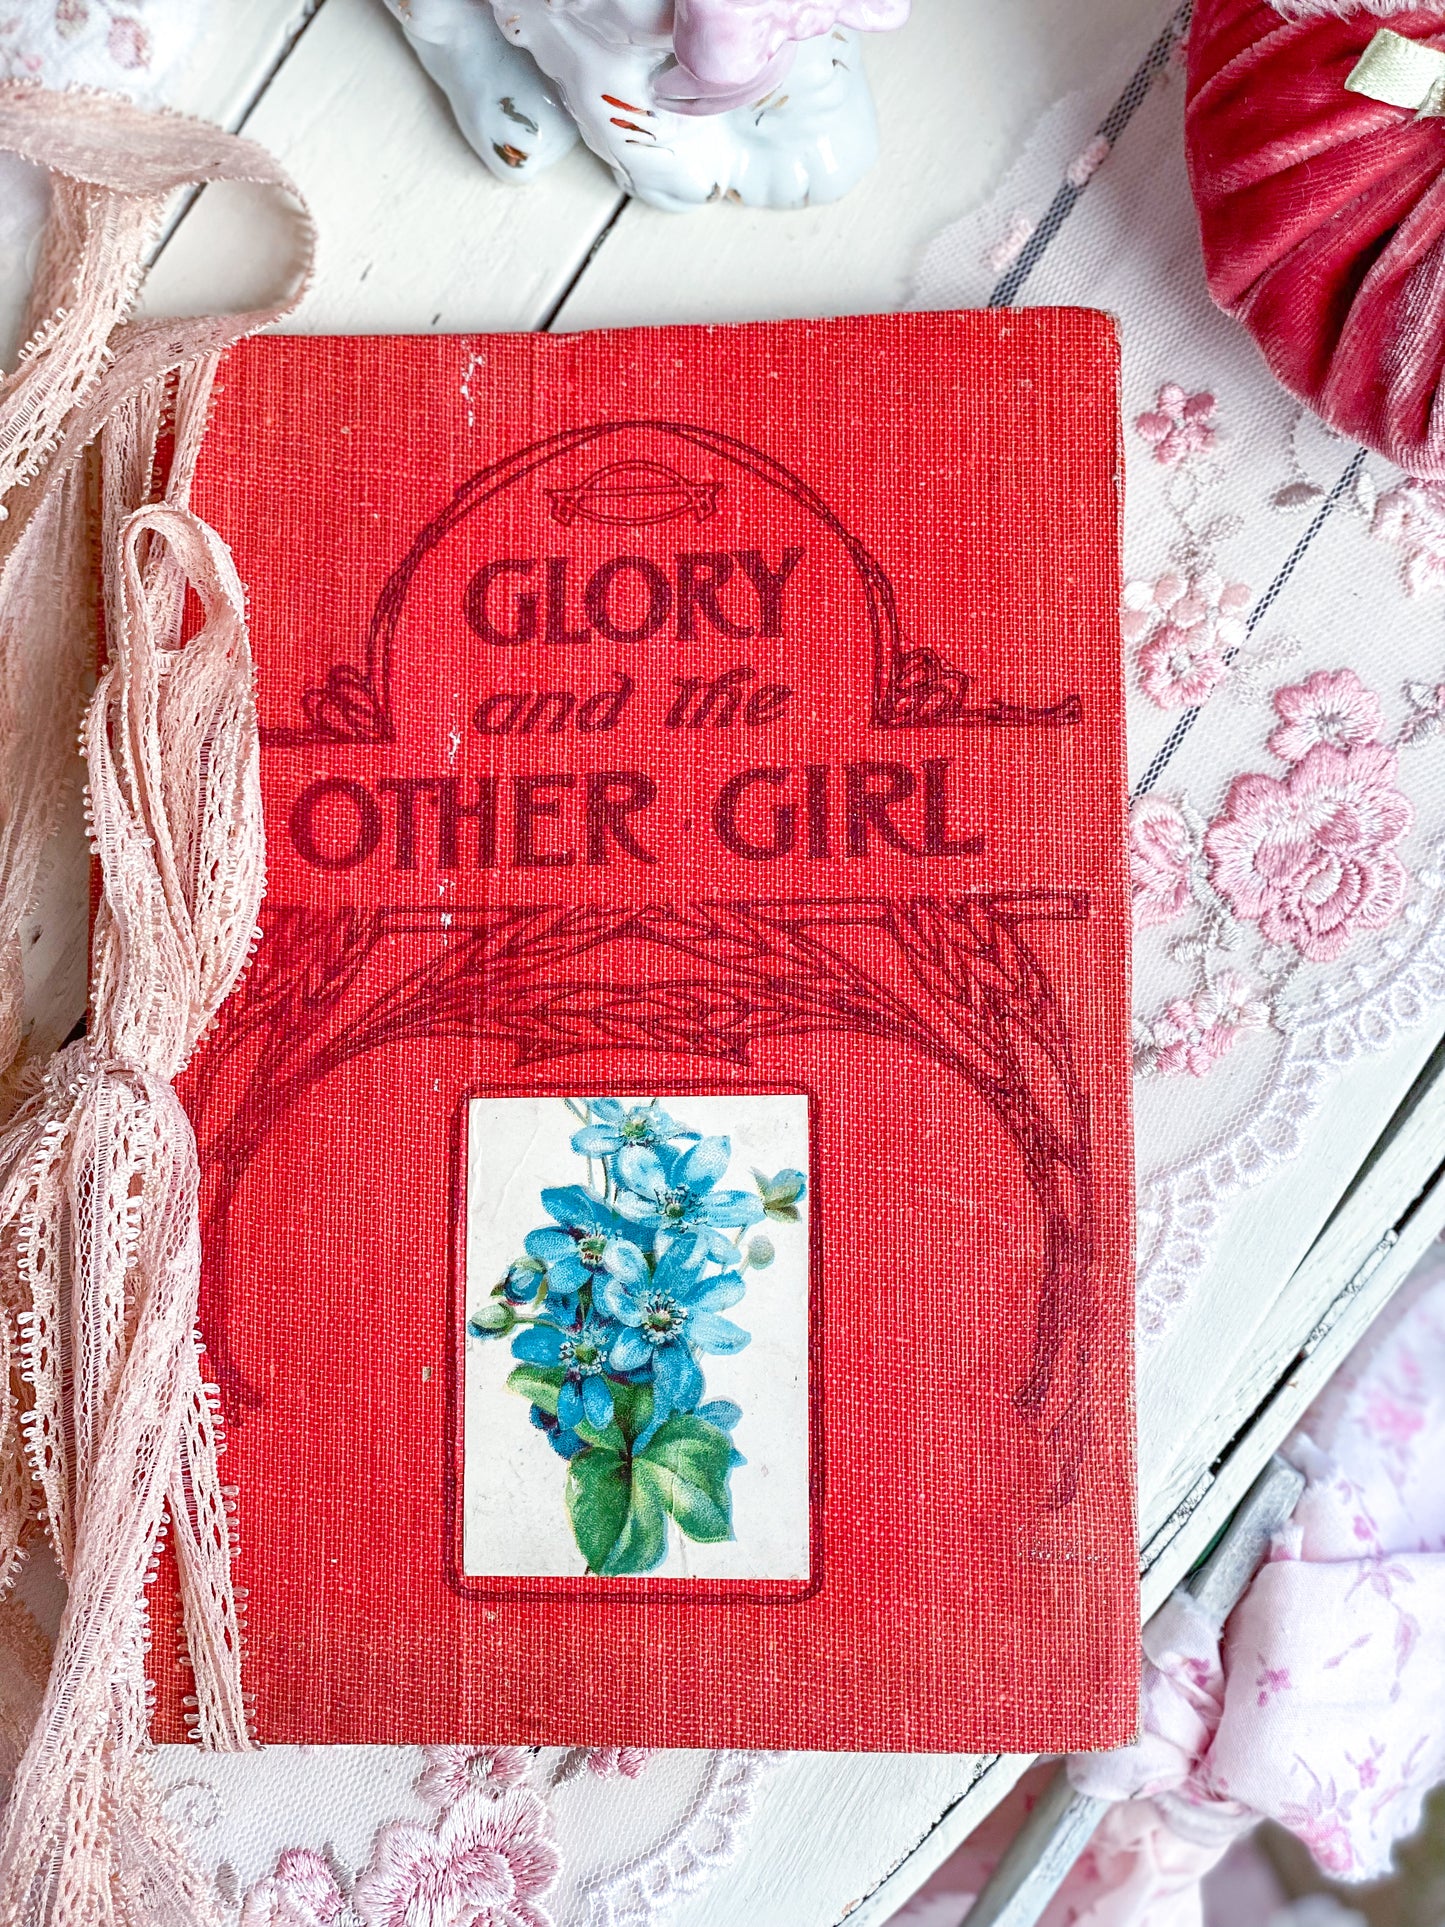 Glory and the Other Girl - Red with blue flowers